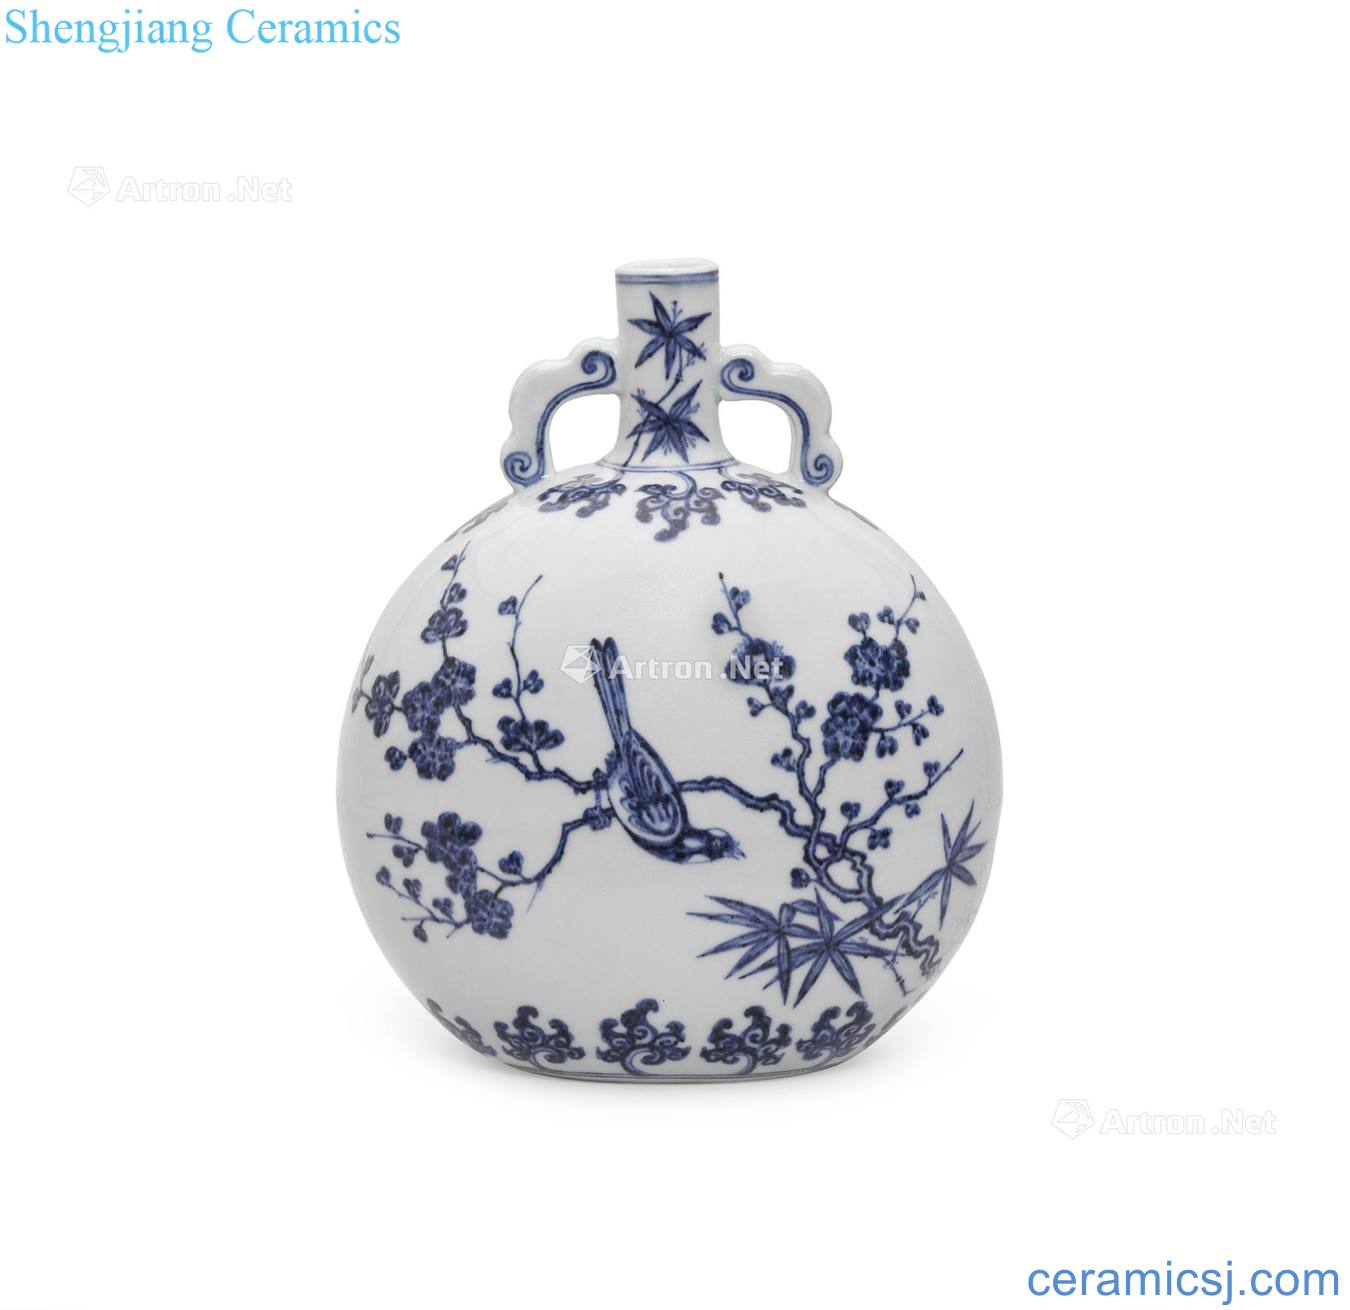 In the eighteenth century On blue and white xi mei tip on bottles